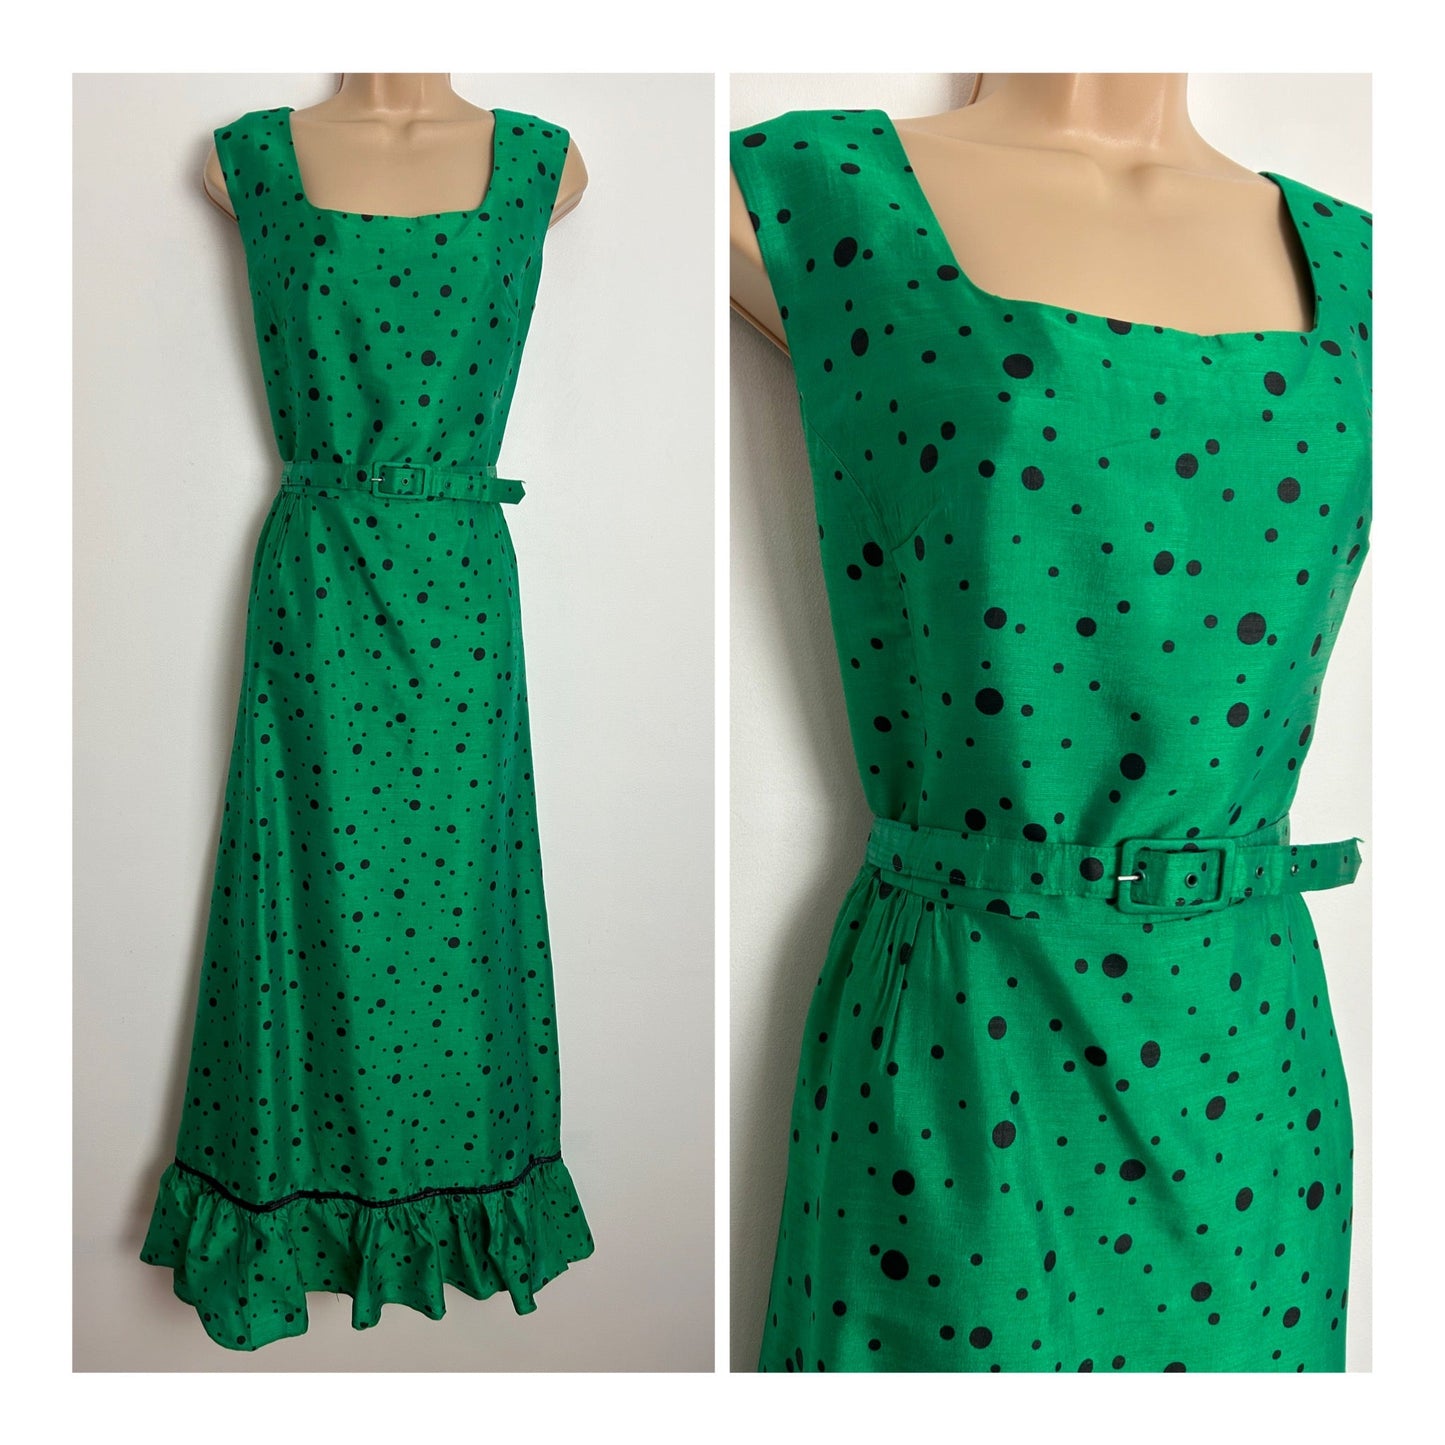 Vintage Late 1960s/Early 1970s  CARNEGIE OF LONDON Approx UK Size 10 Green & Black Polka Dot Print Sleeveless Belted Maxi Dress